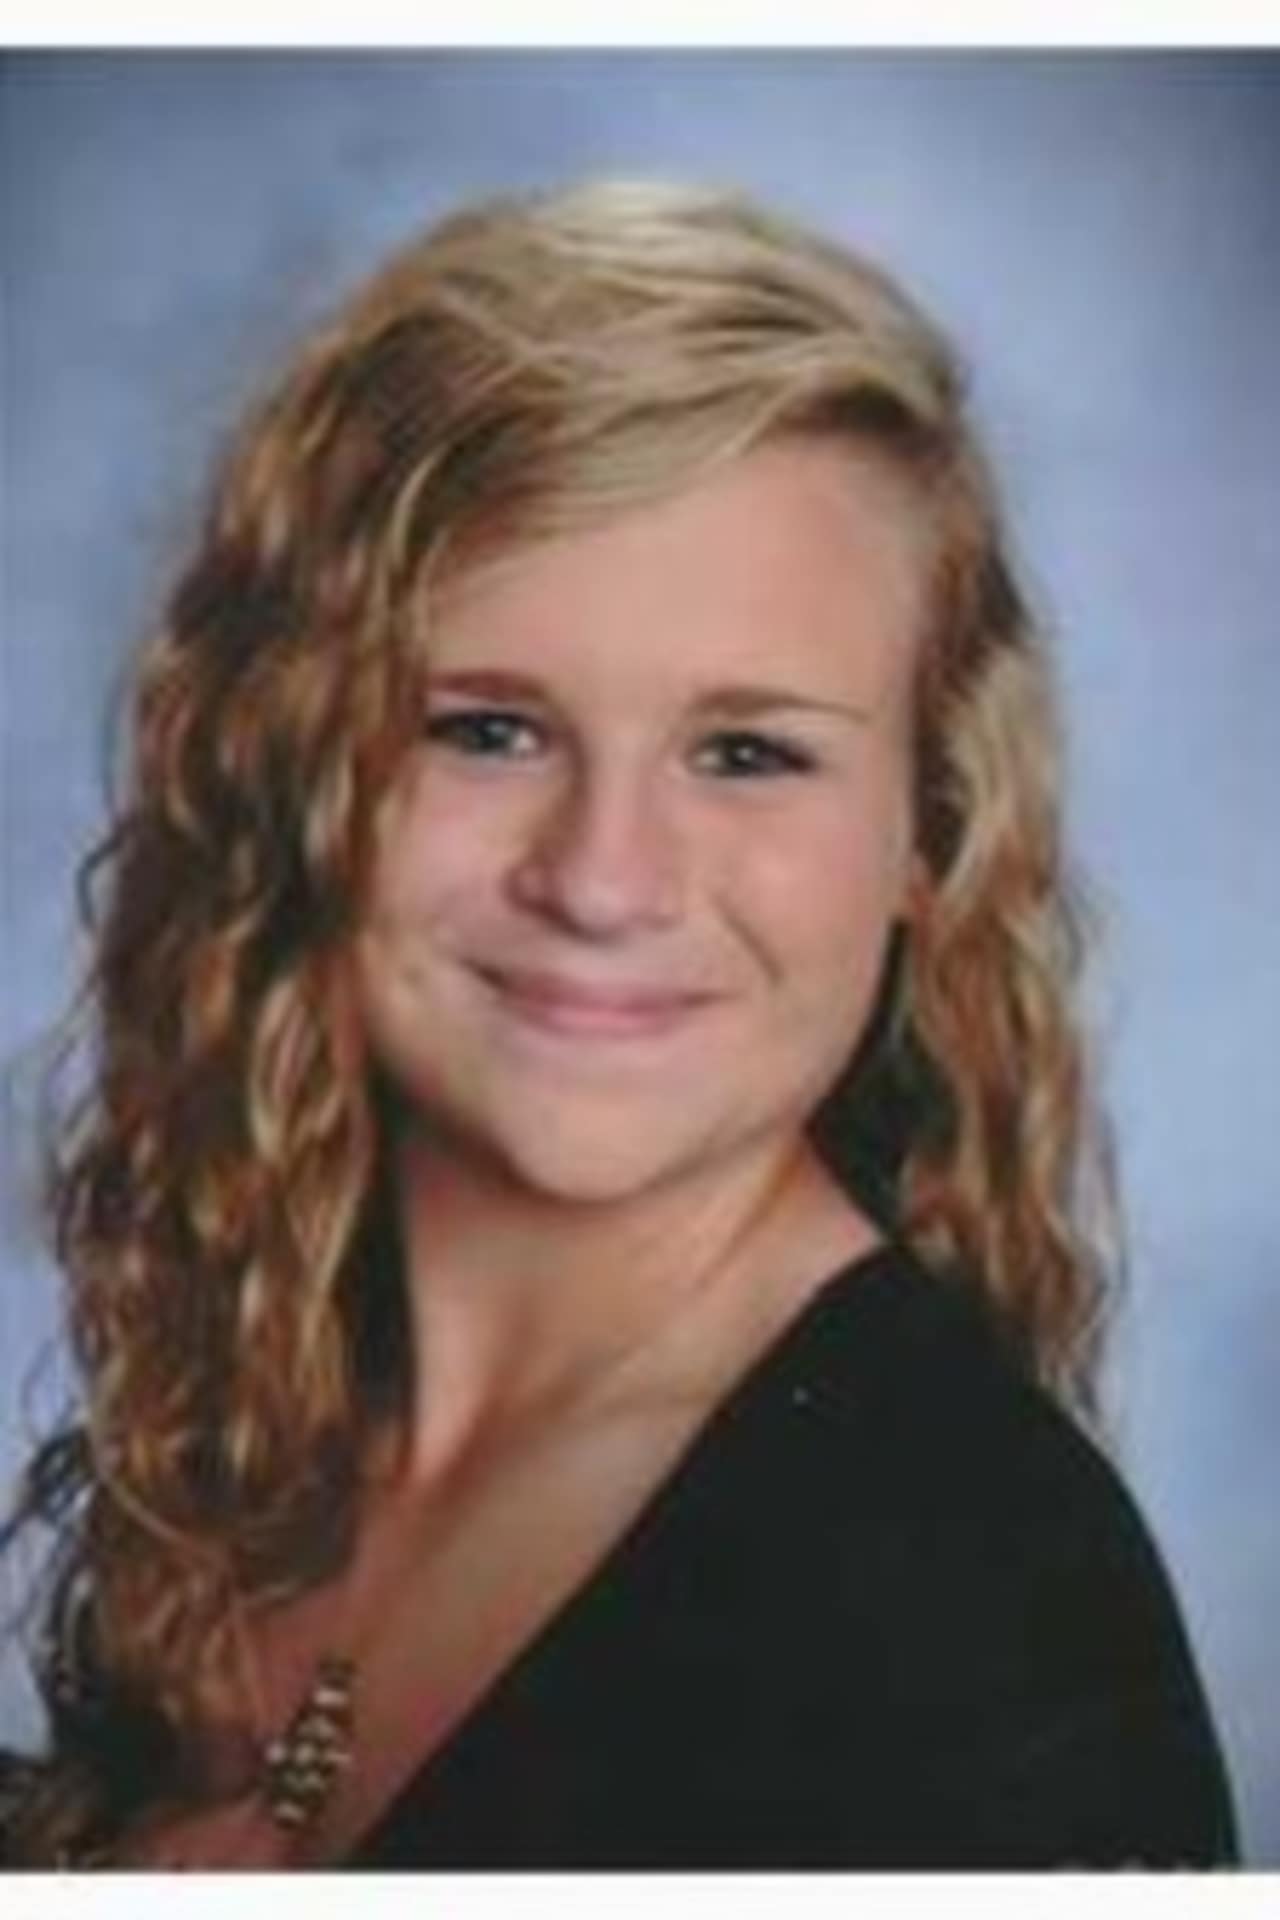 Kelsey Durkin of New Canaan, who died in an automobile accident on Dec. 3, helped the Rams win three state championships in girls ice hockey.